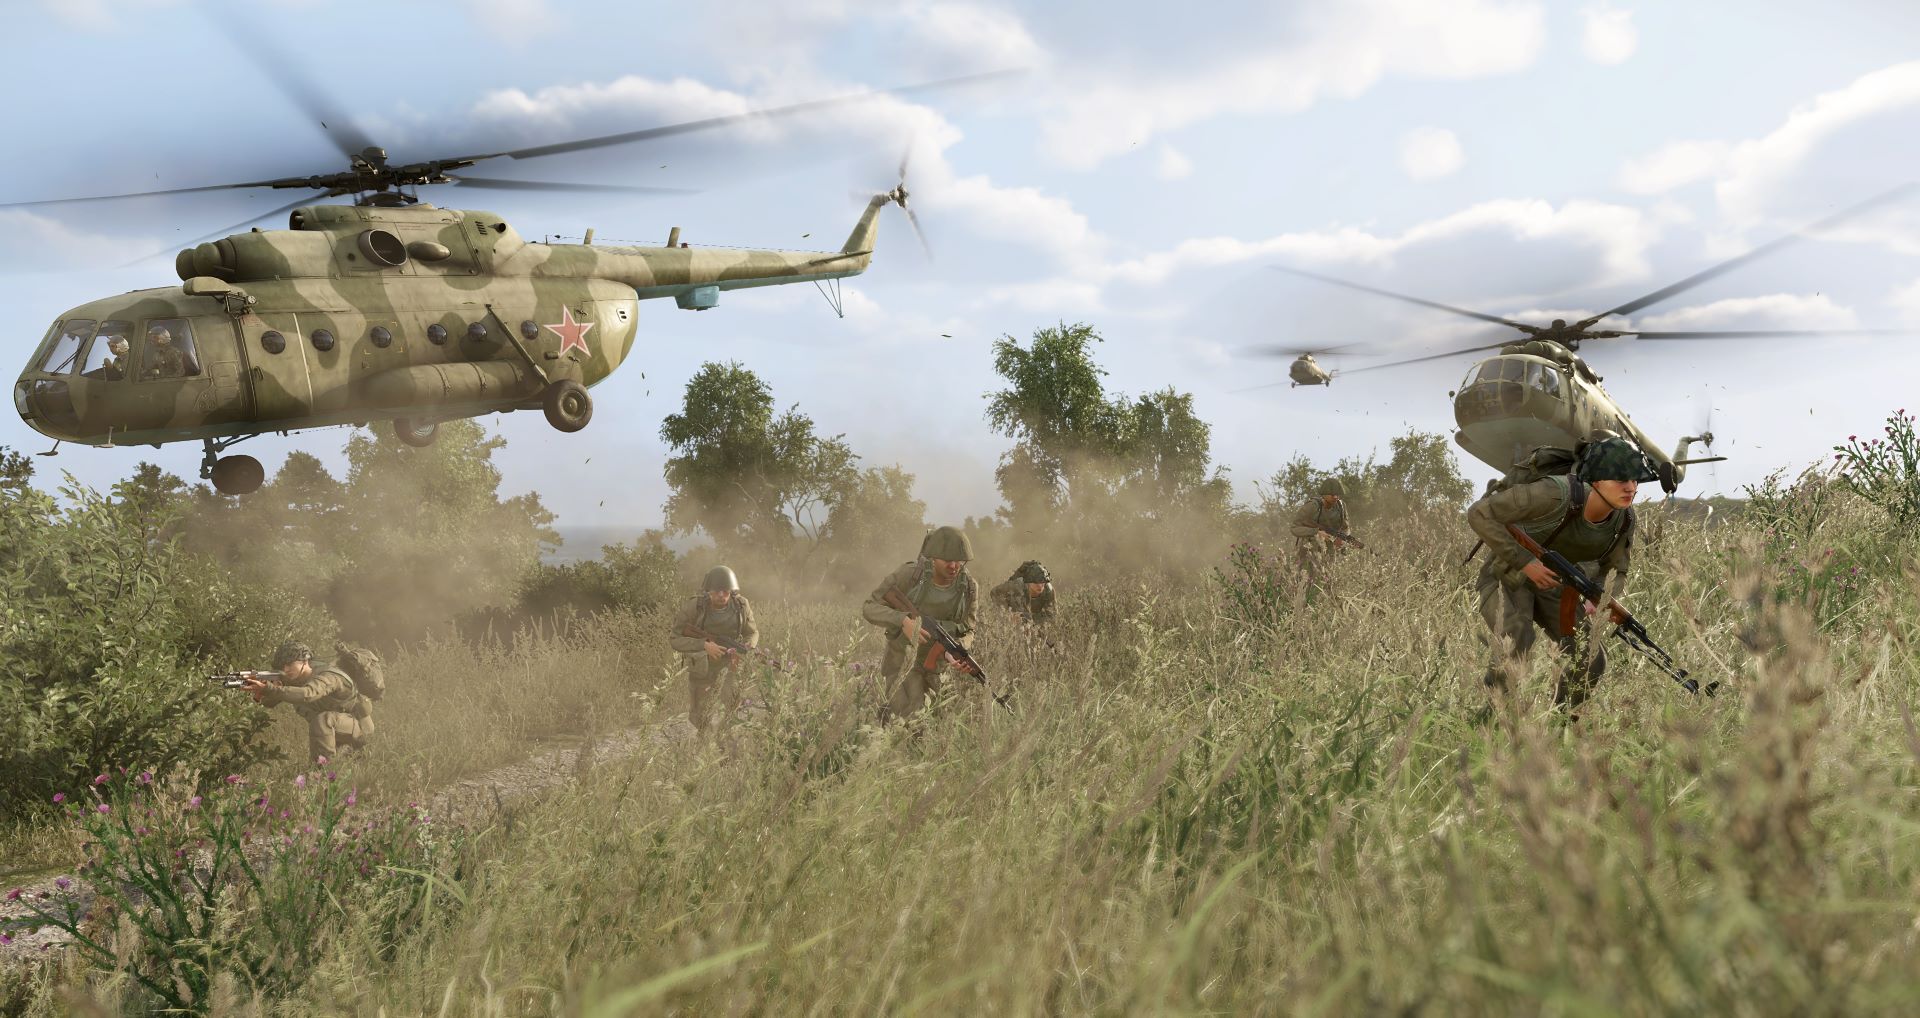 Arma Reforger introduces immersive military simulator cross play to Xbox